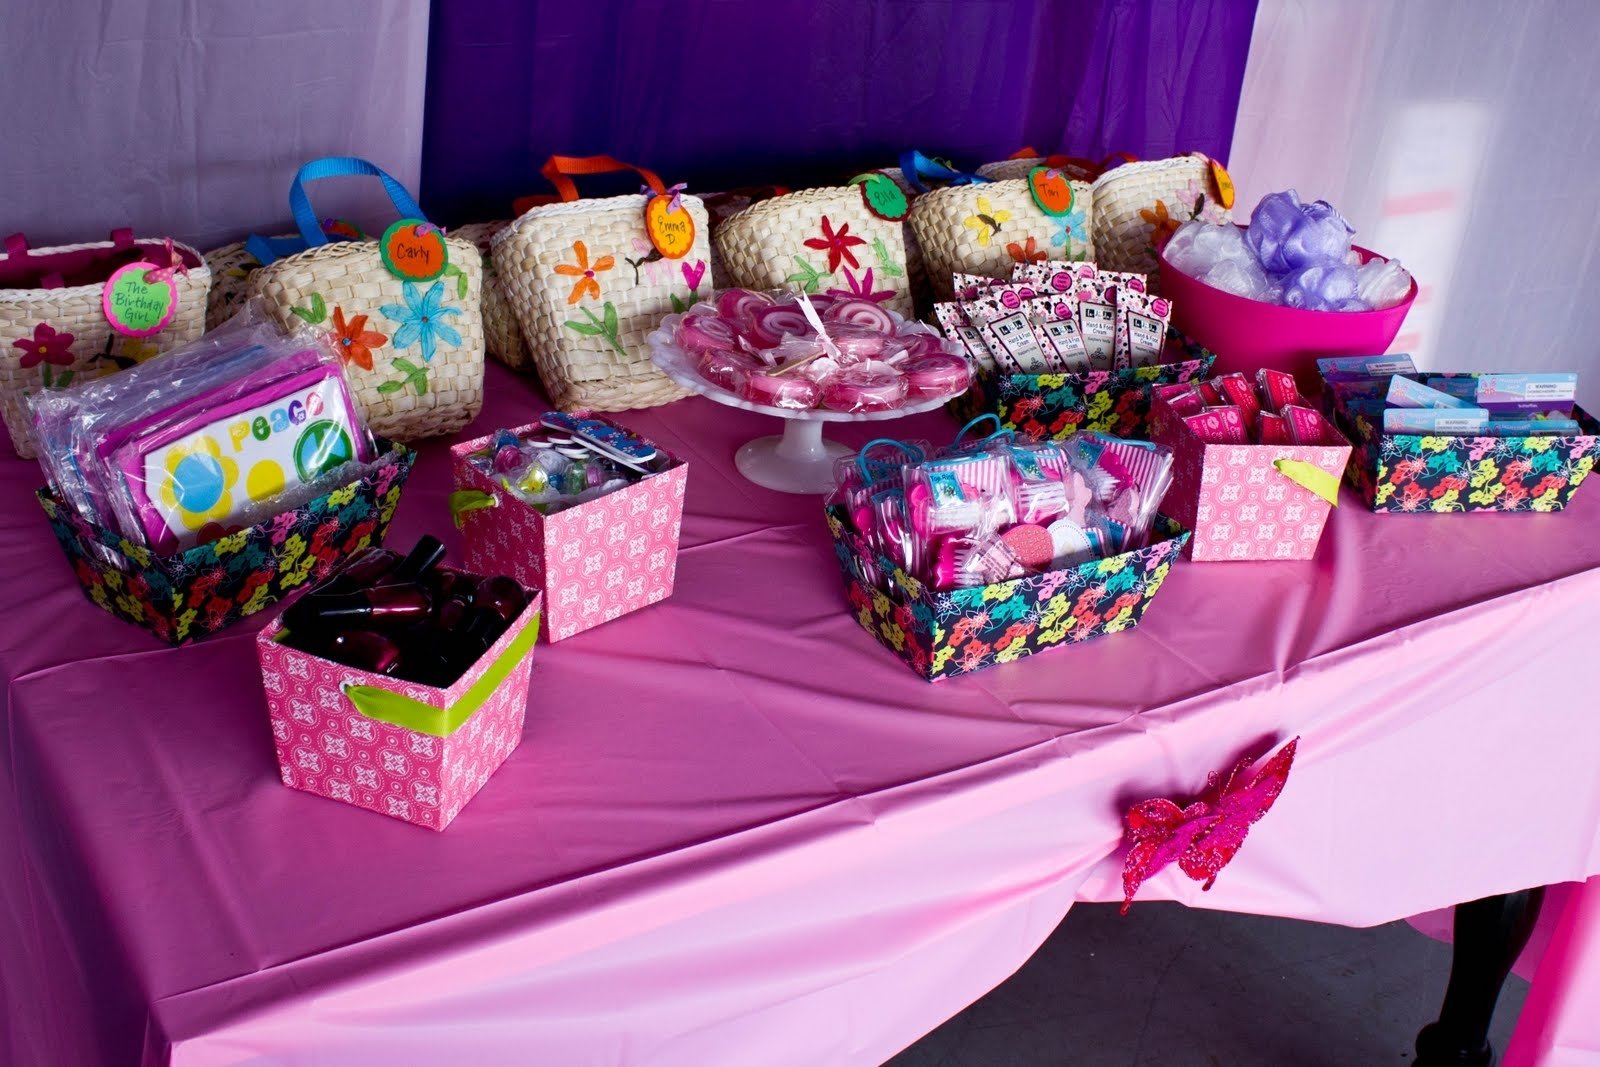 10 Most Popular Ideas For Girl Birthday Party girls spa birthday party ideas pool design ideas 2022